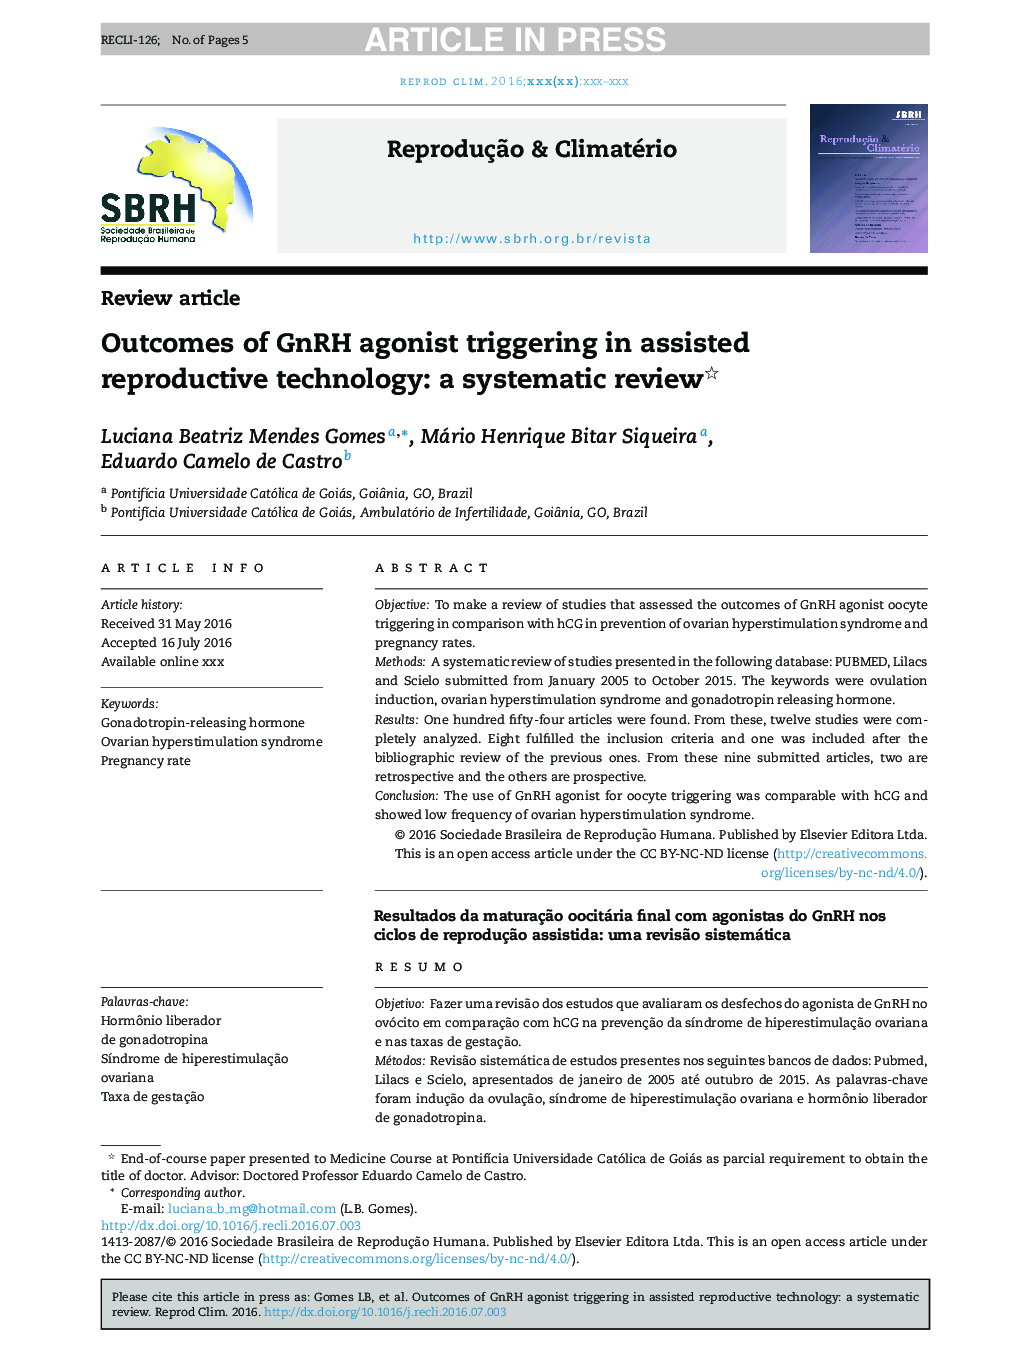 Outcomes of GnRH agonist triggering in assisted reproductive technology: a systematic review